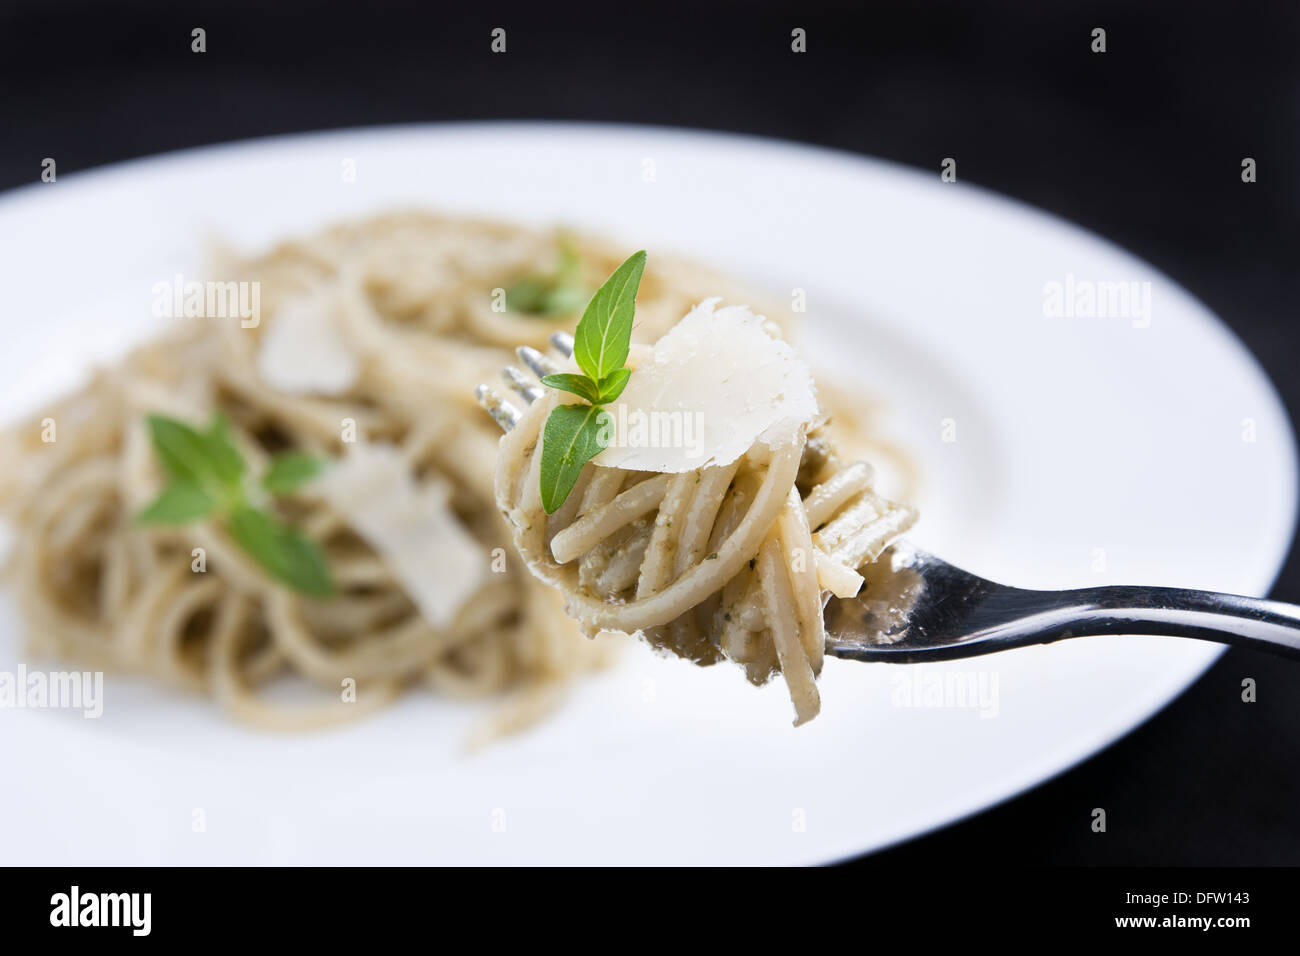 Spaghetti with cheese and basil on a fork Stock Photo